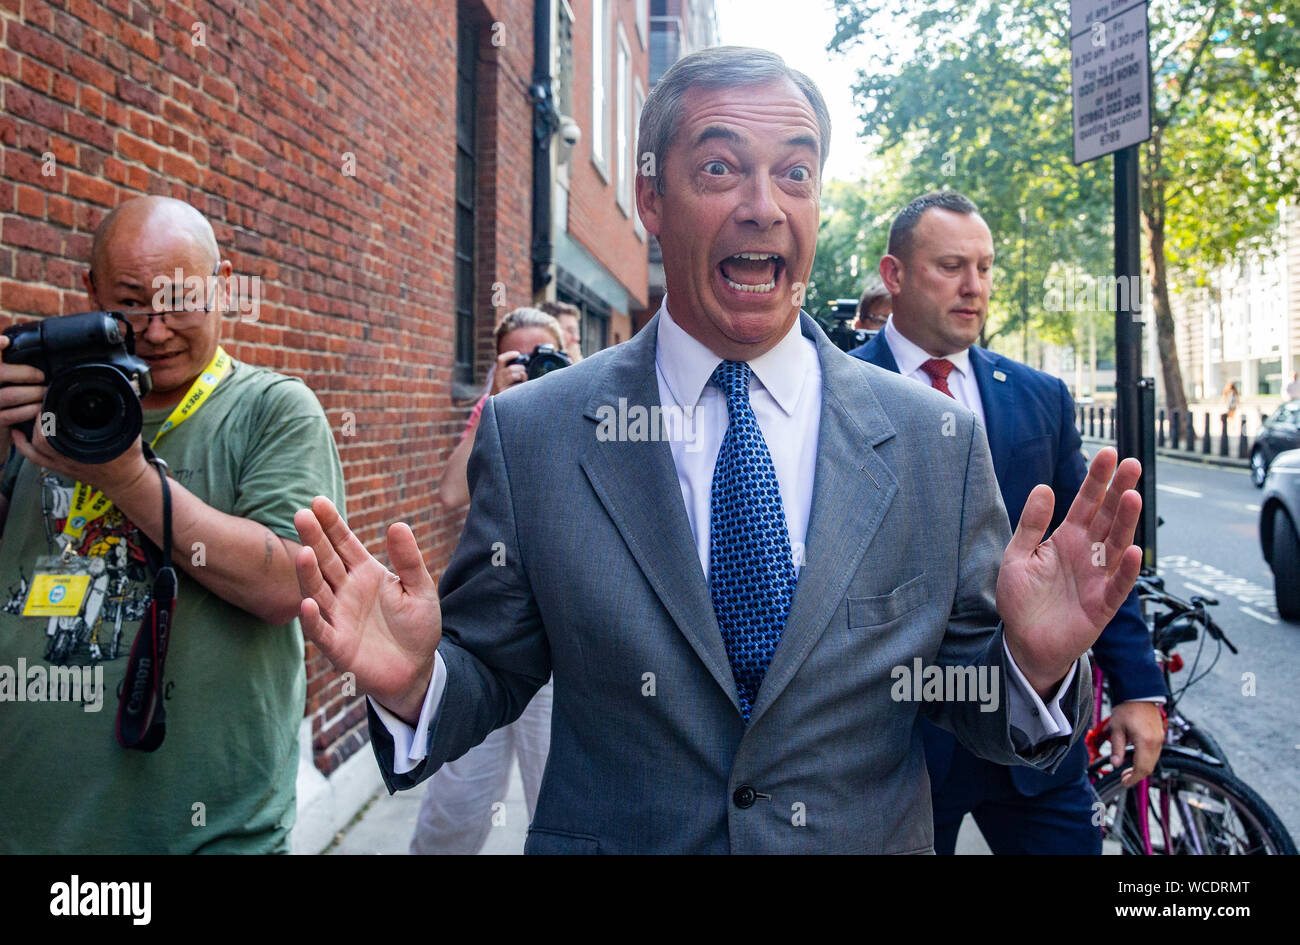 Brexit Party Leader, Nigel Farage, arrives for the Conference The Brexit Party holds a conference in London to announce 635 Prospective Parliamentary Stock Photo